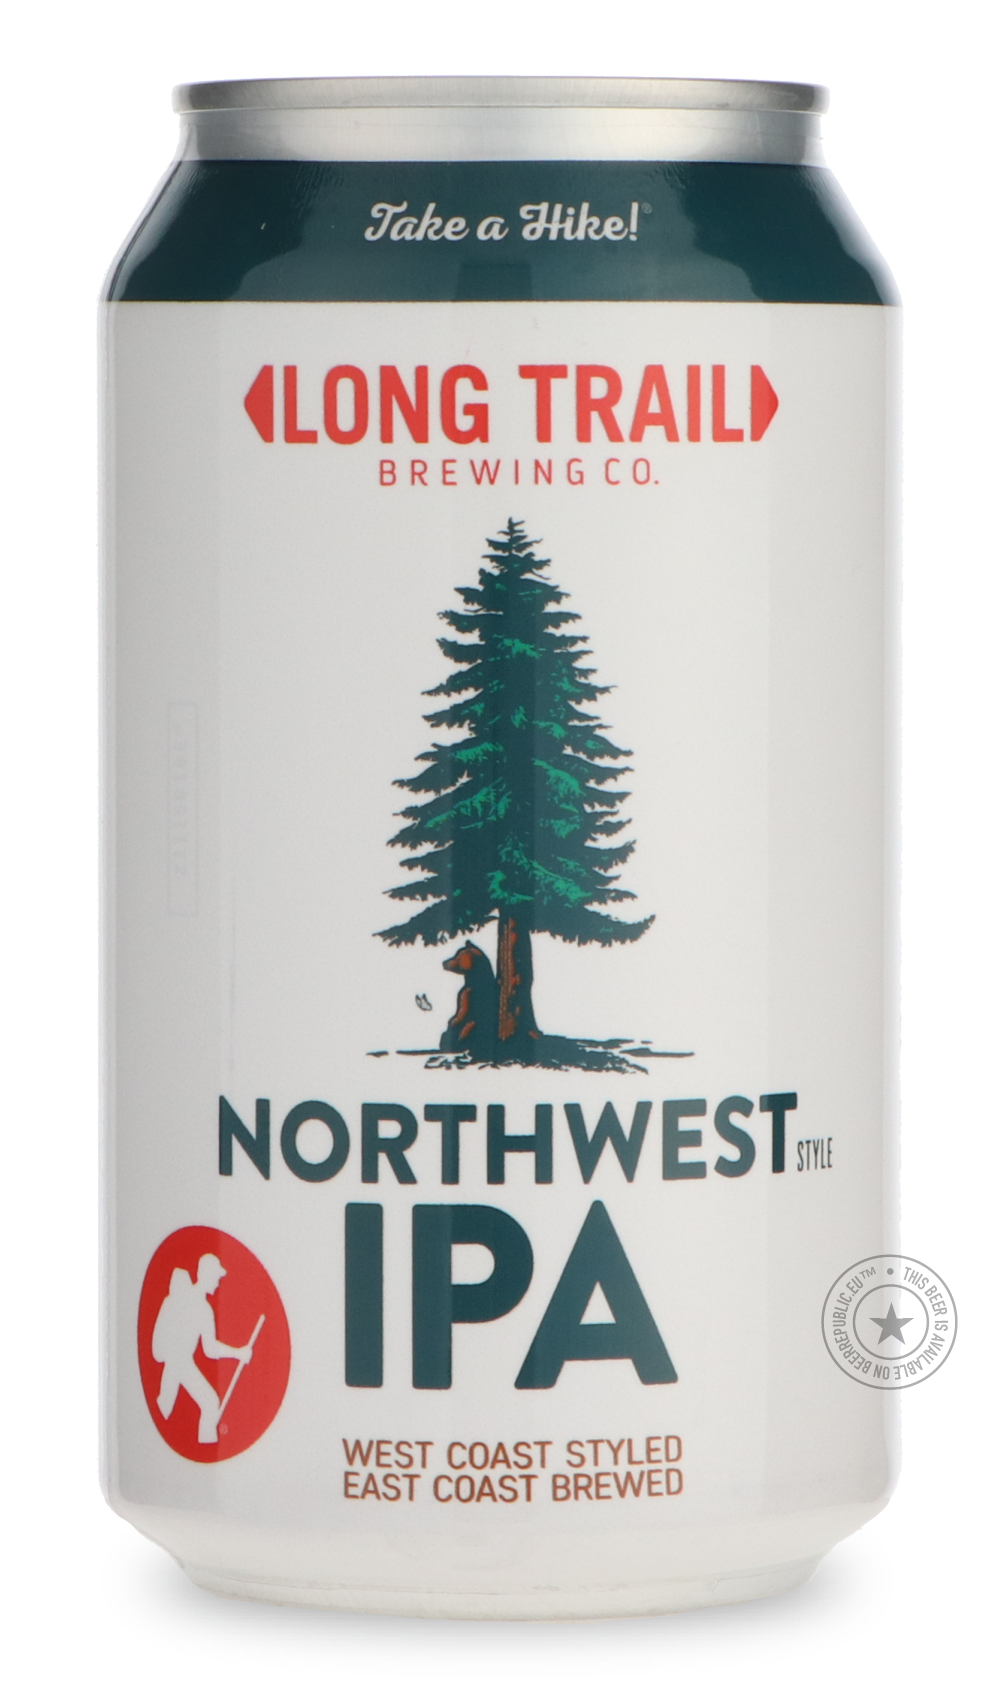 -Long Trail- Northwest IPA-IPA- Only @ Beer Republic - The best online beer store for American & Canadian craft beer - Buy beer online from the USA and Canada - Bier online kopen - Amerikaans bier kopen - Craft beer store - Craft beer kopen - Amerikanisch bier kaufen - Bier online kaufen - Acheter biere online - IPA - Stout - Porter - New England IPA - Hazy IPA - Imperial Stout - Barrel Aged - Barrel Aged Imperial Stout - Brown - Dark beer - Blond - Blonde - Pilsner - Lager - Wheat - Weizen - Amber - Barley